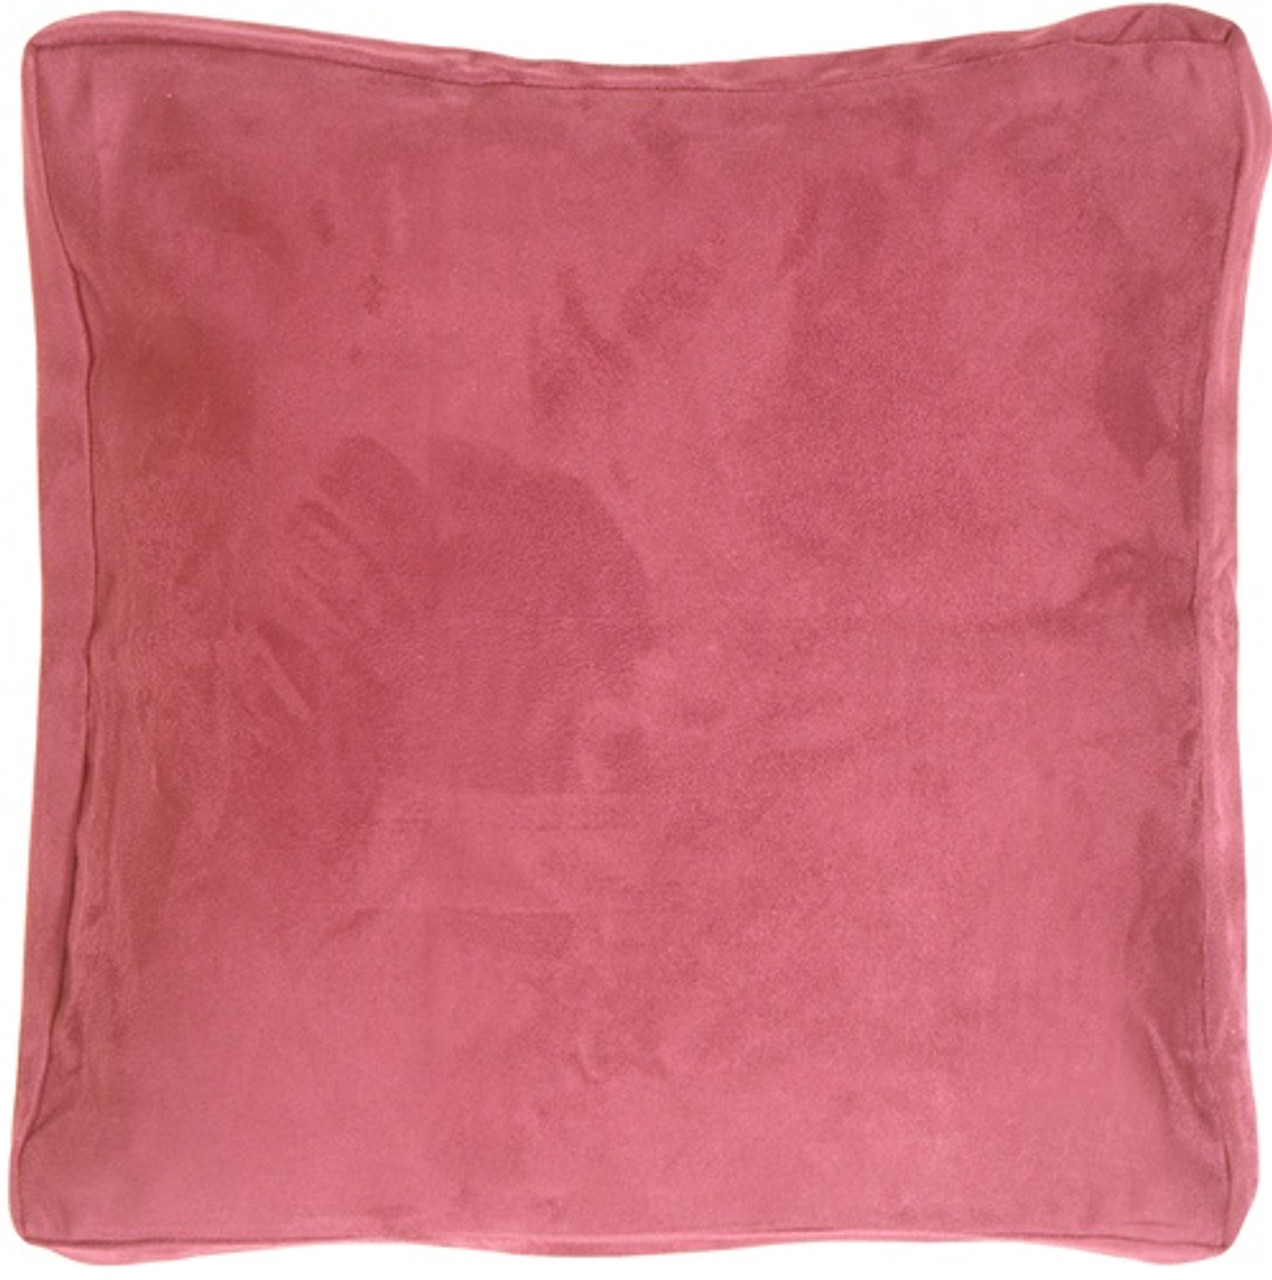 16x16 Box Edge Royal Suede Pink Throw Pillow From Pillow Decor